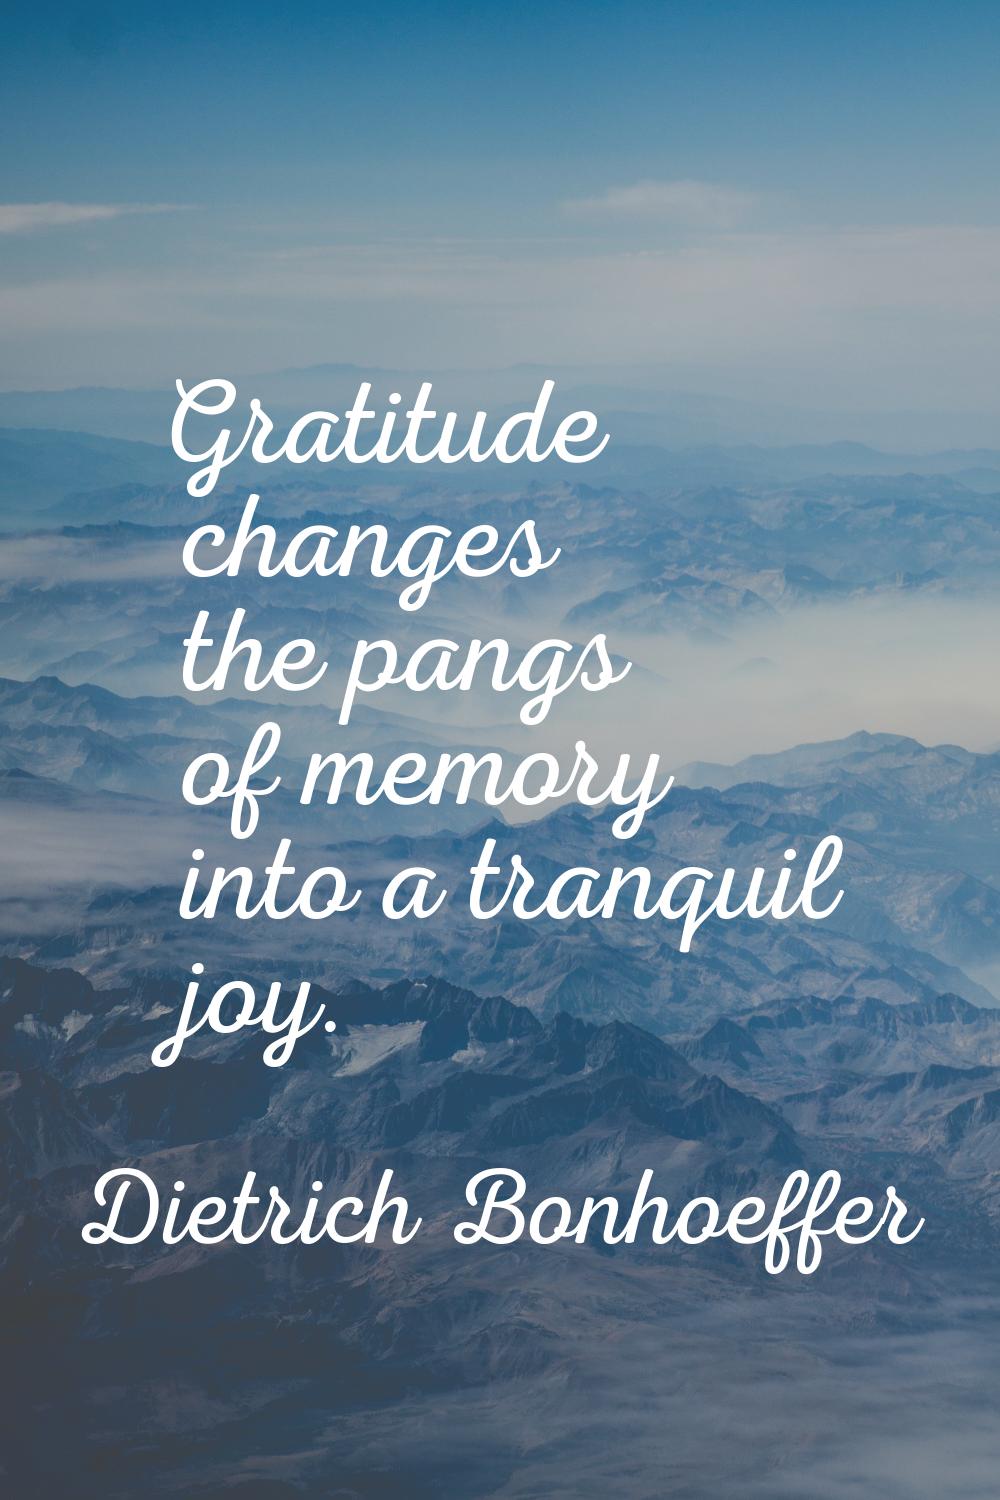 Gratitude changes the pangs of memory into a tranquil joy.